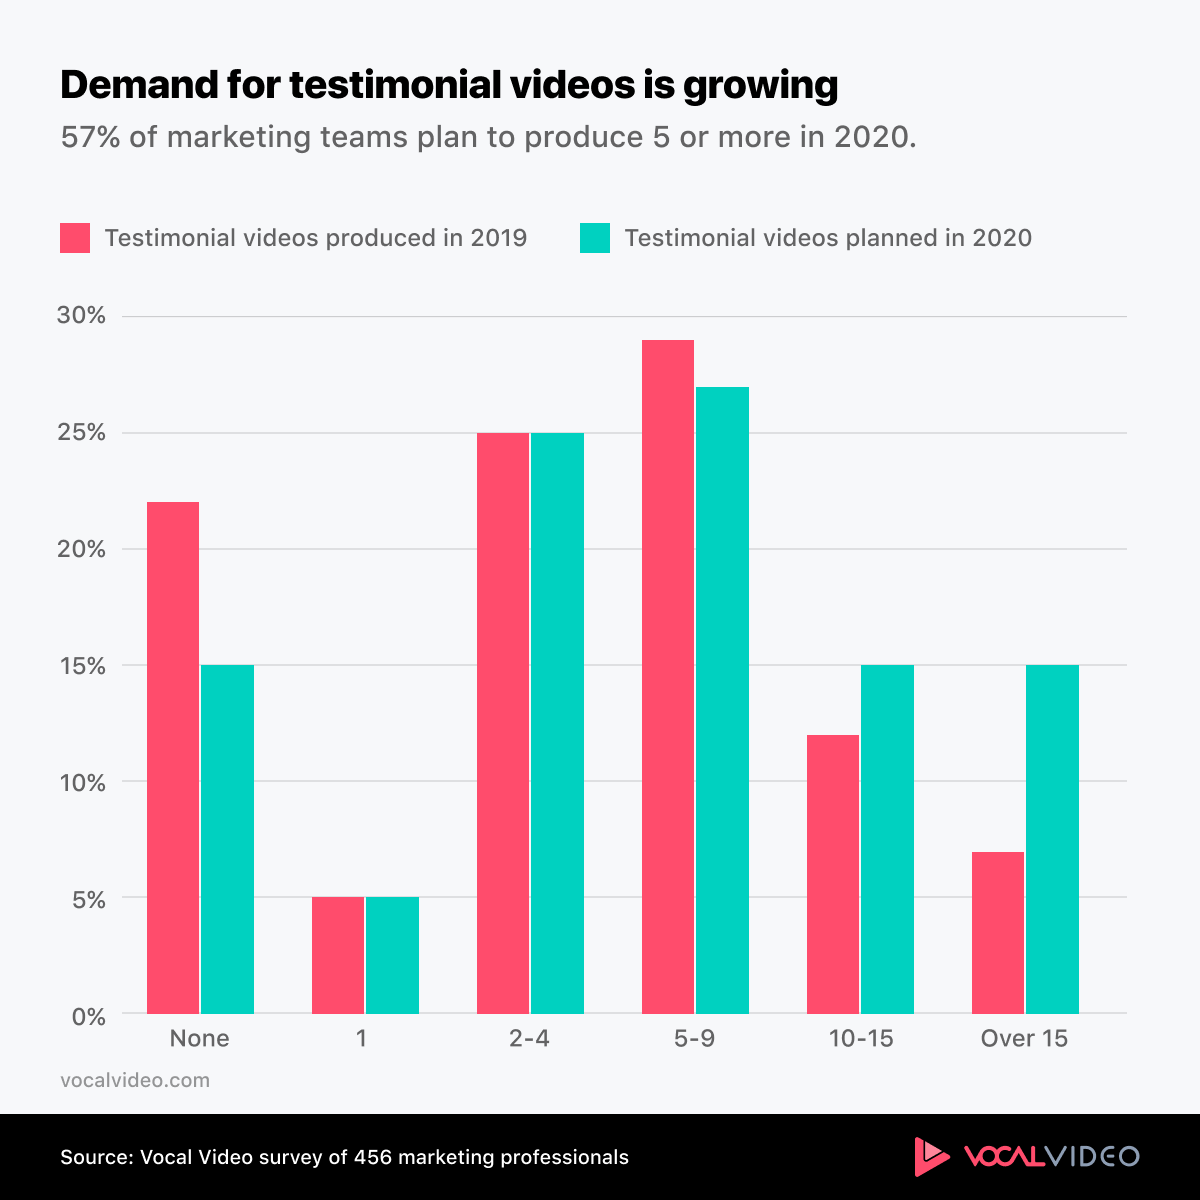 Demand for testimonial videos is growing. 